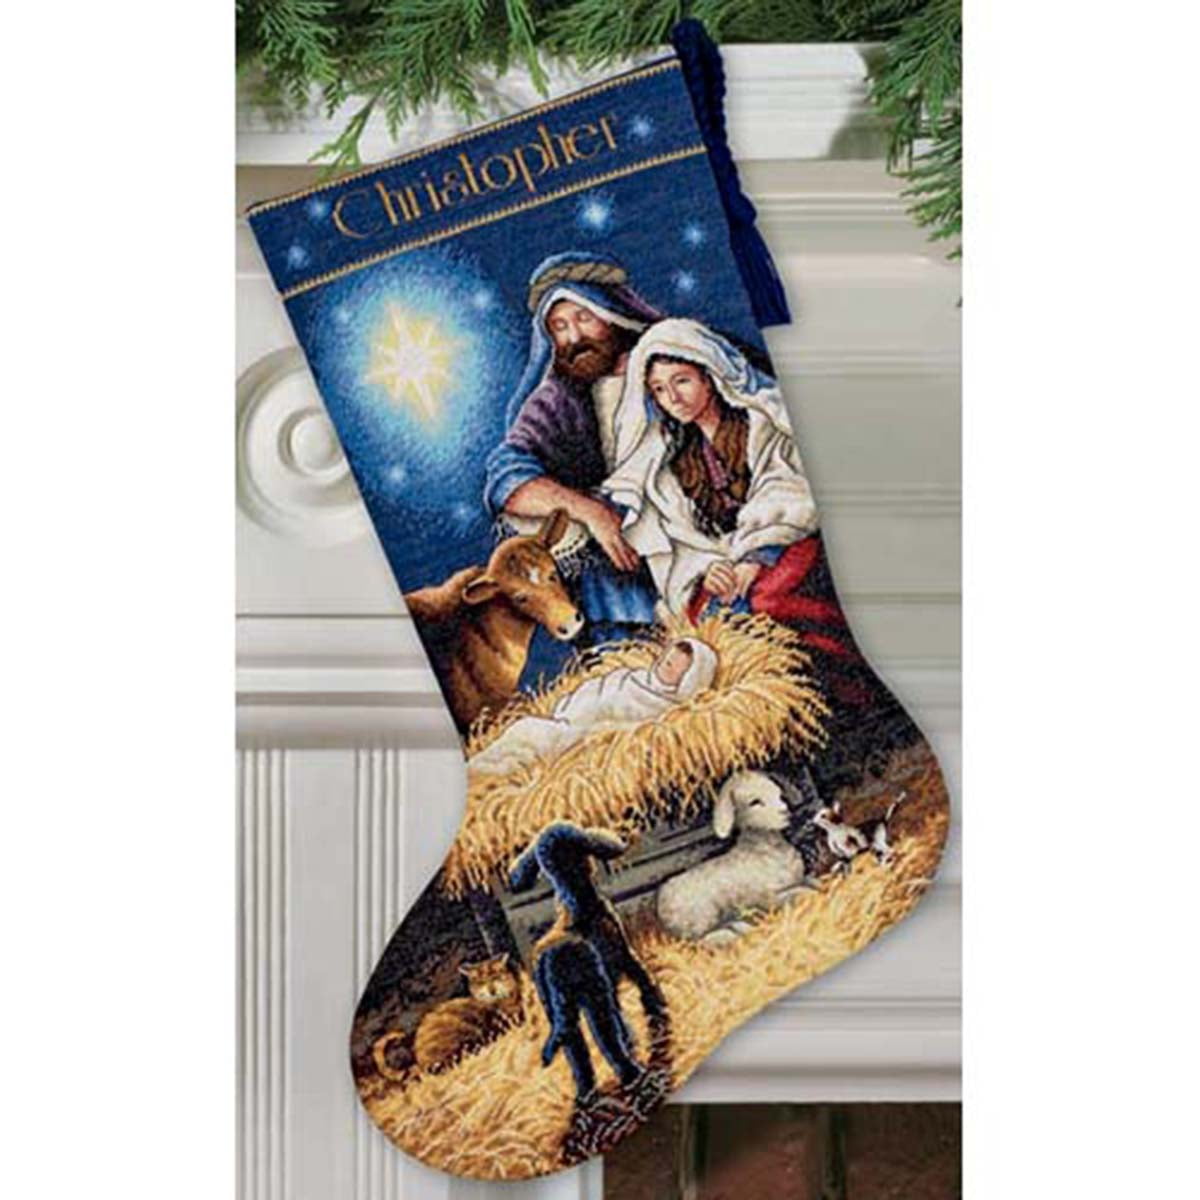 Make A Christmas Stocking With A Counted Cross Stitch Name On The